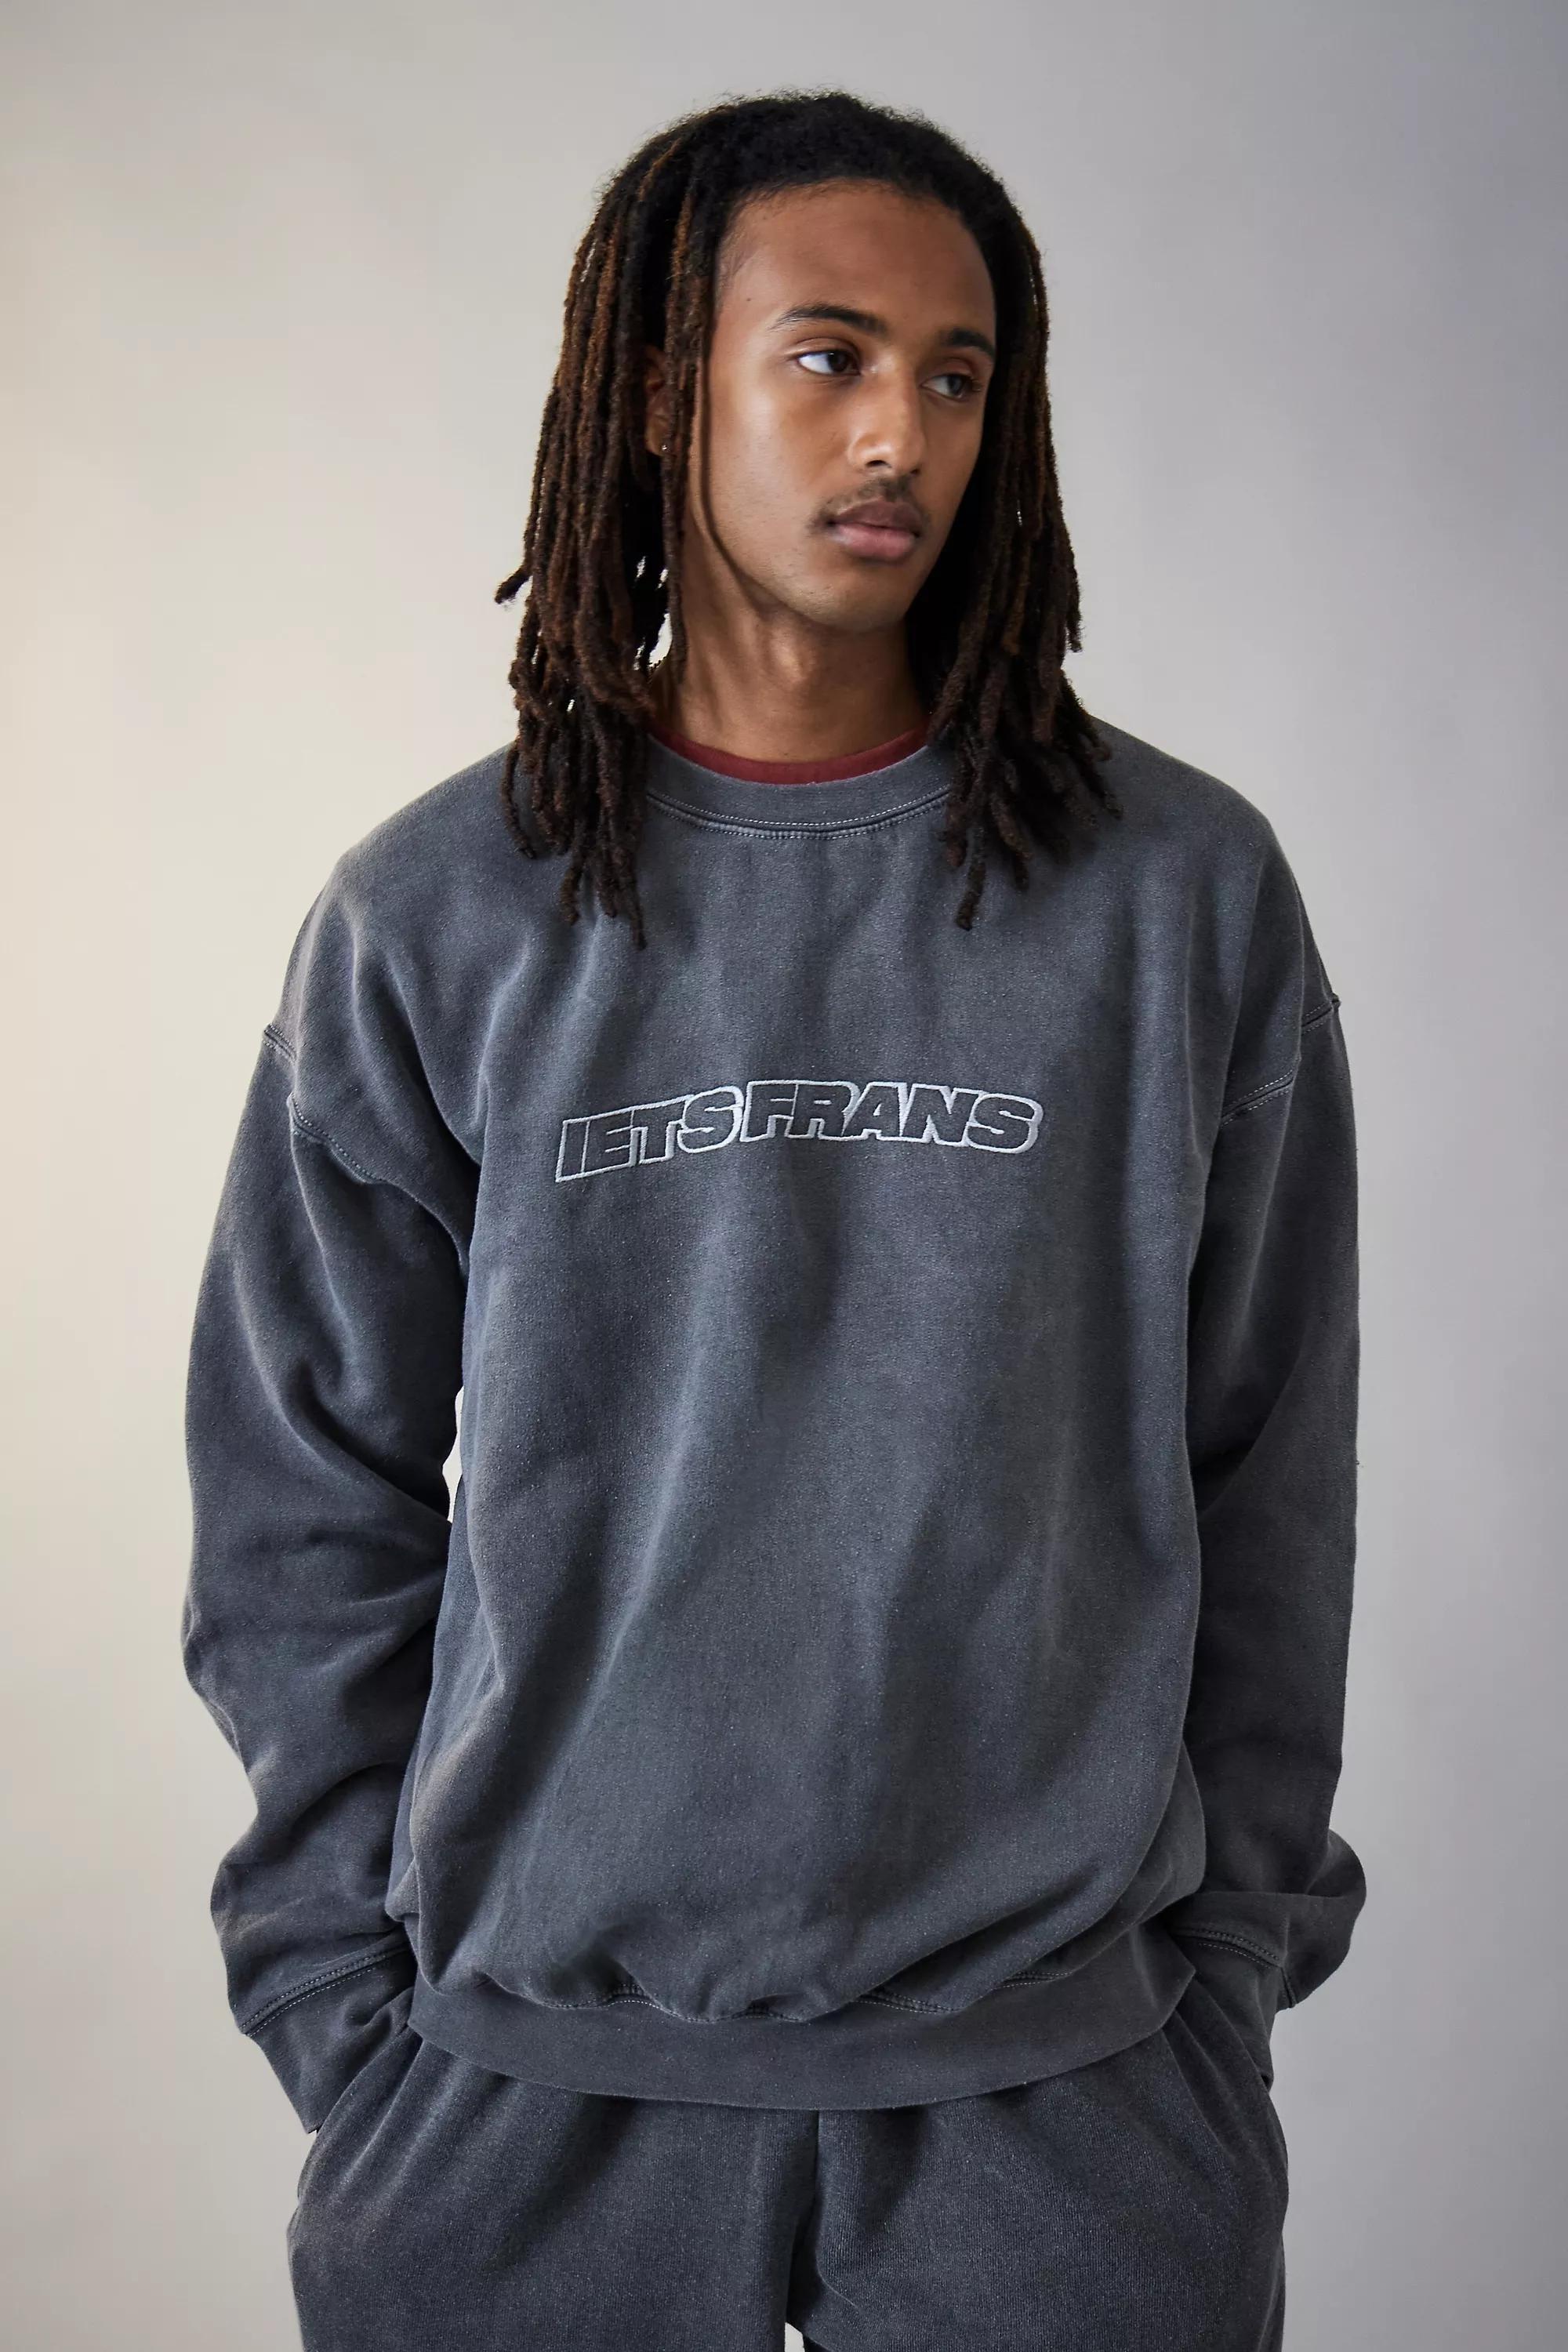 Urban Outfitters - Black Washed Embroidered Sweatshirt